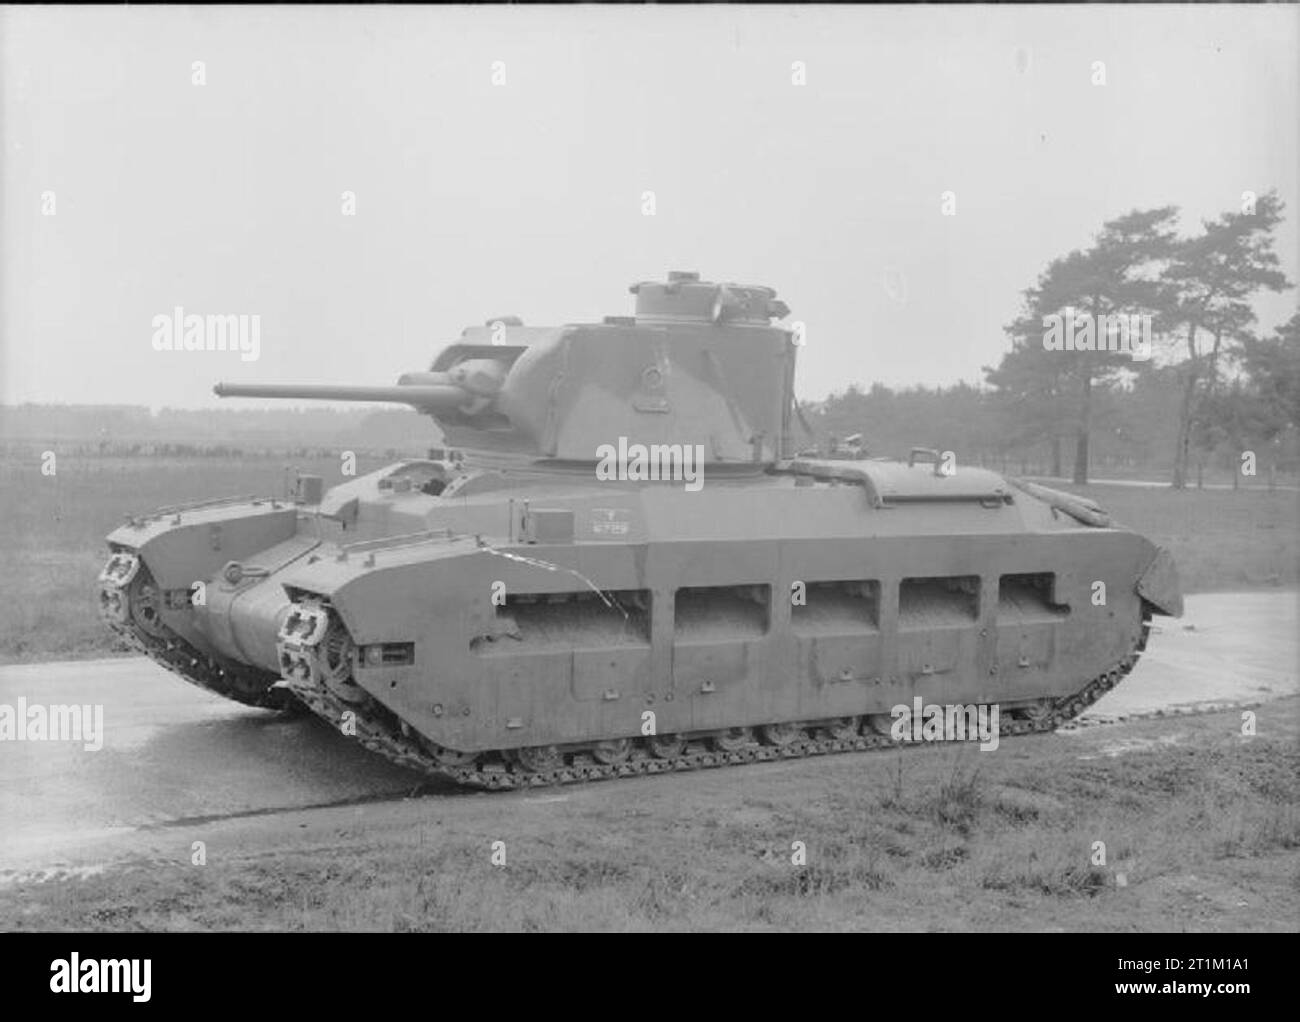 Part 1 – The Infantry Tank Mark II, Matilda II (A12) in Service with the  Canadian Army Overseas